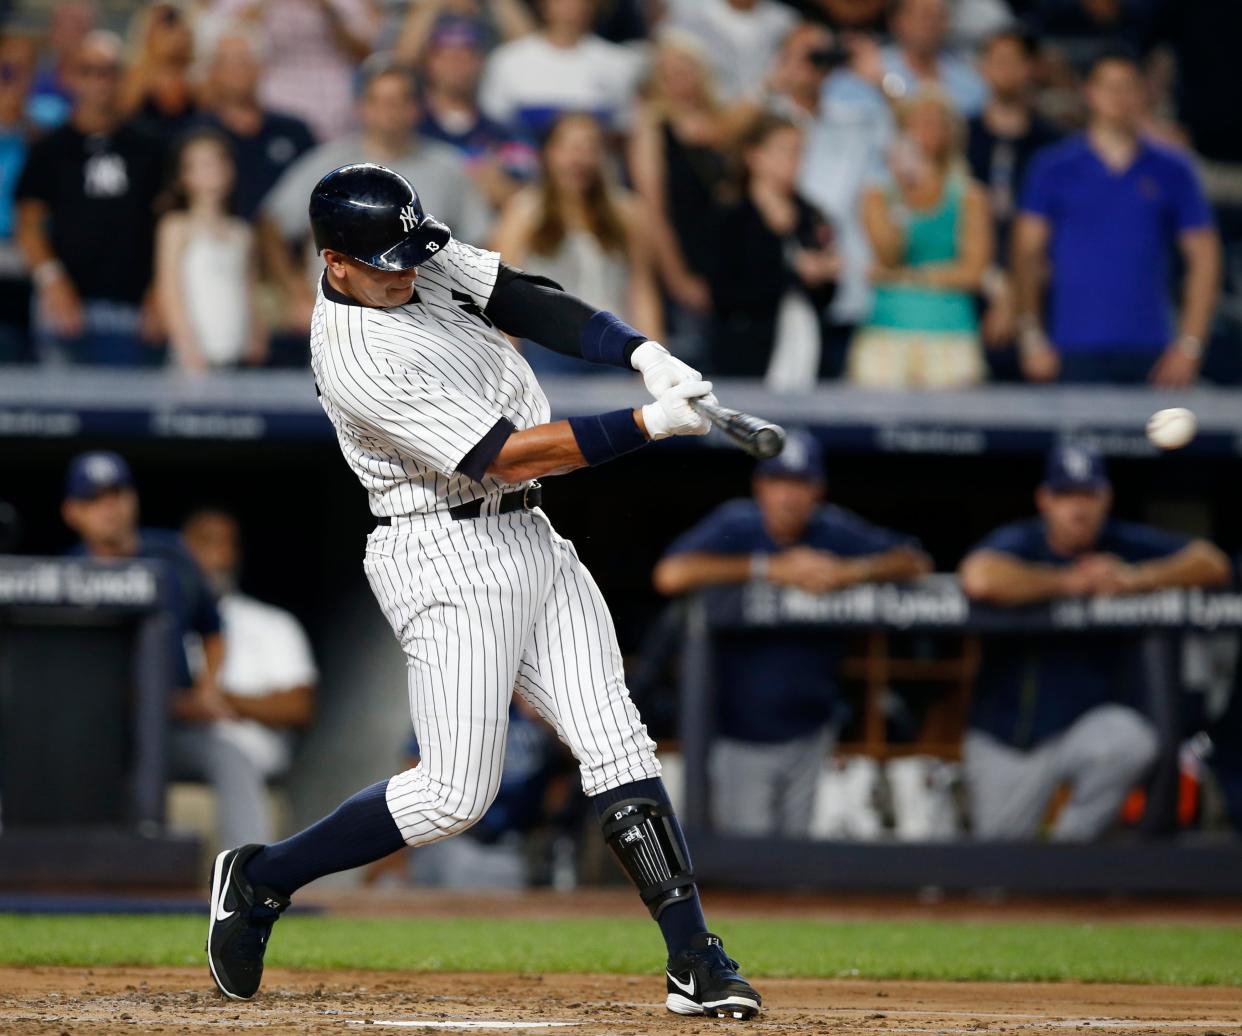 New York Yankees' Alex Rodriguez against the Tampa Bay Rays on Friday, Aug. 12, 2016. (AP Photo/Kathy Willens)